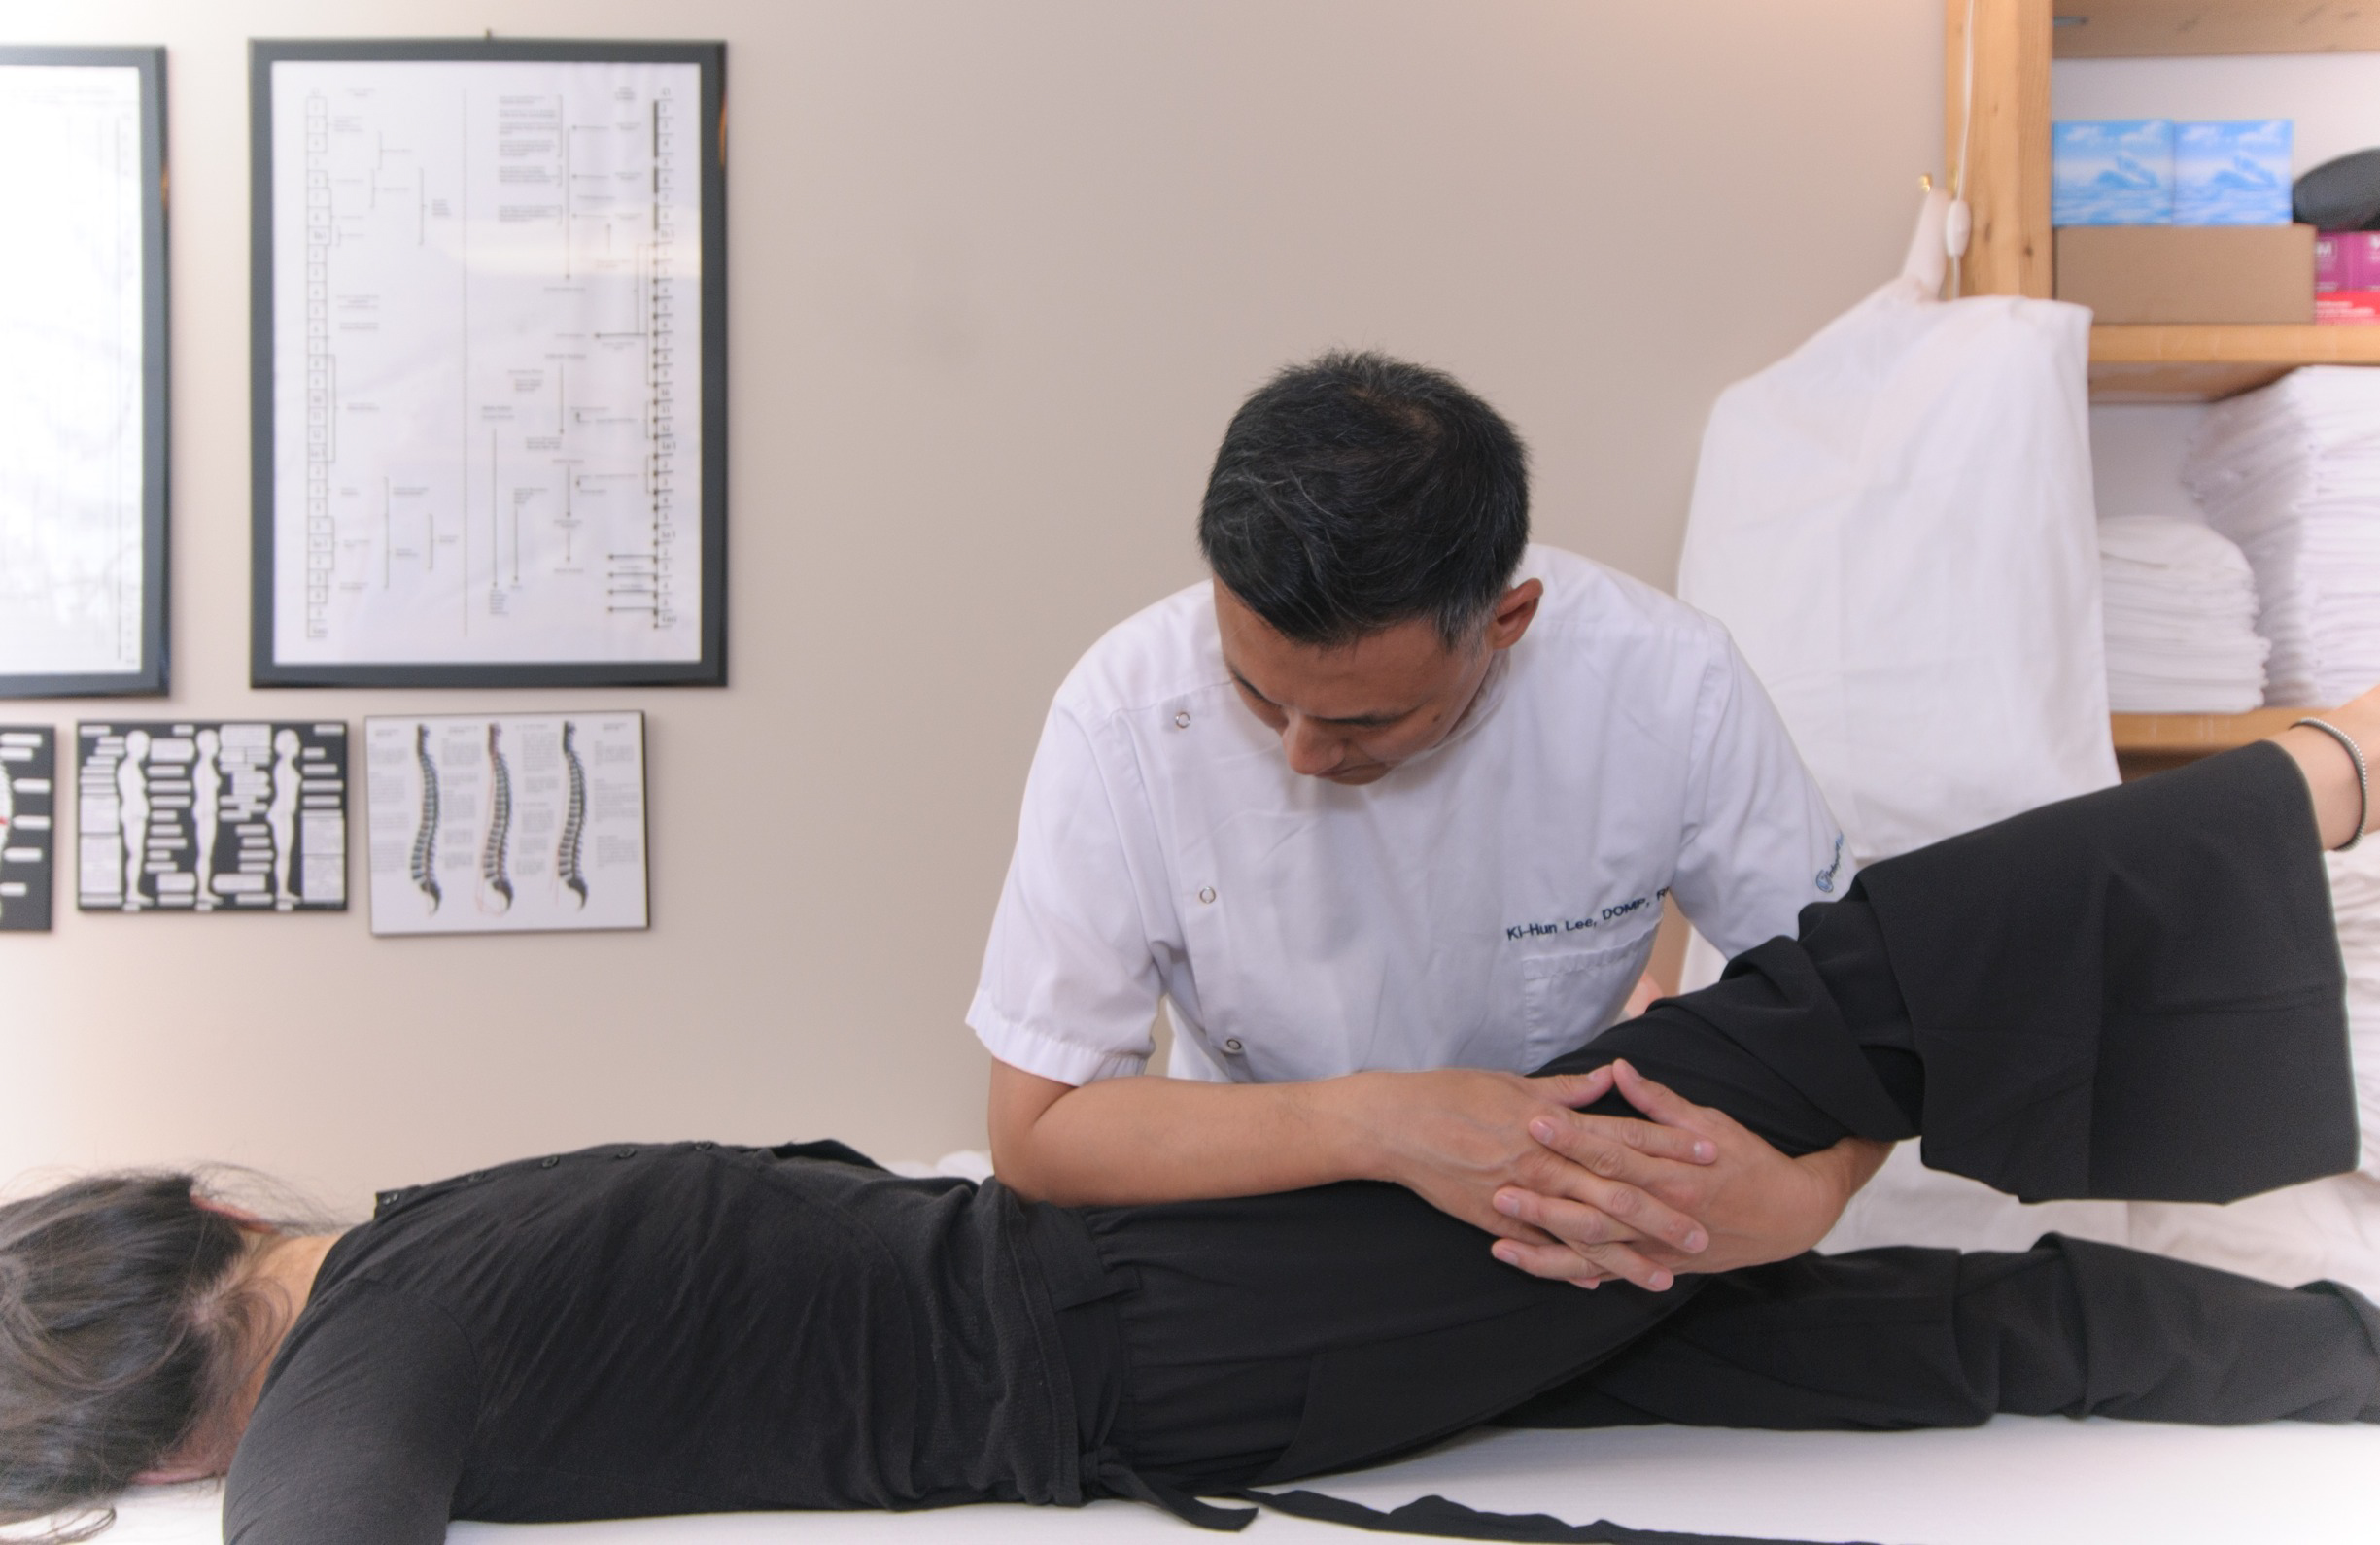 Osteopathy Treatment at Integrated Bodywork